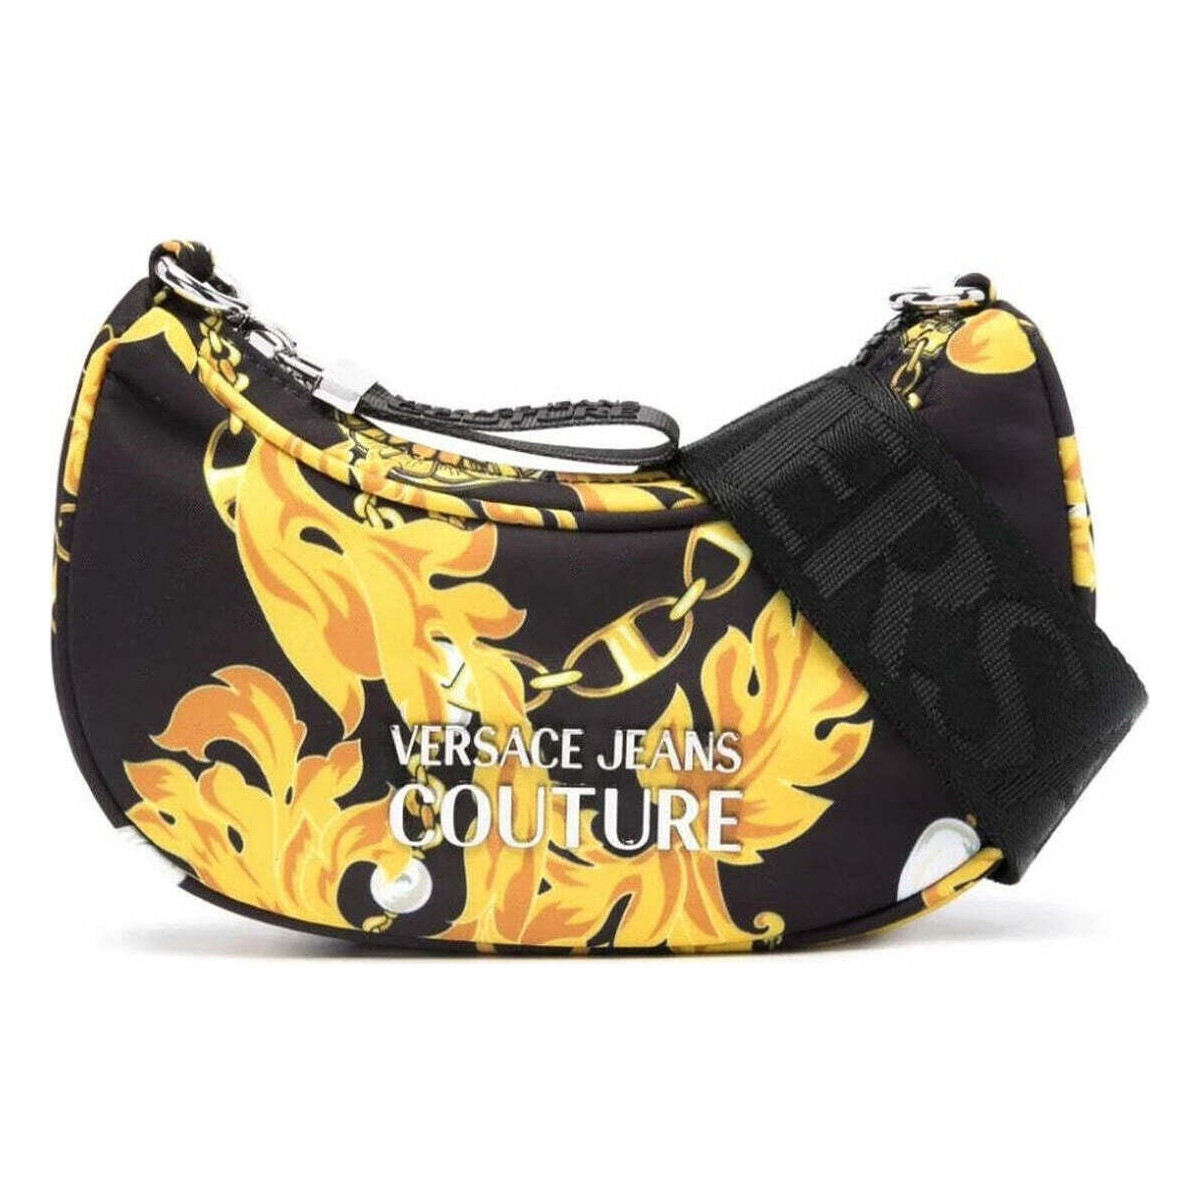 Versace Jeans Couture Multicolore sporty logo hobo bag 